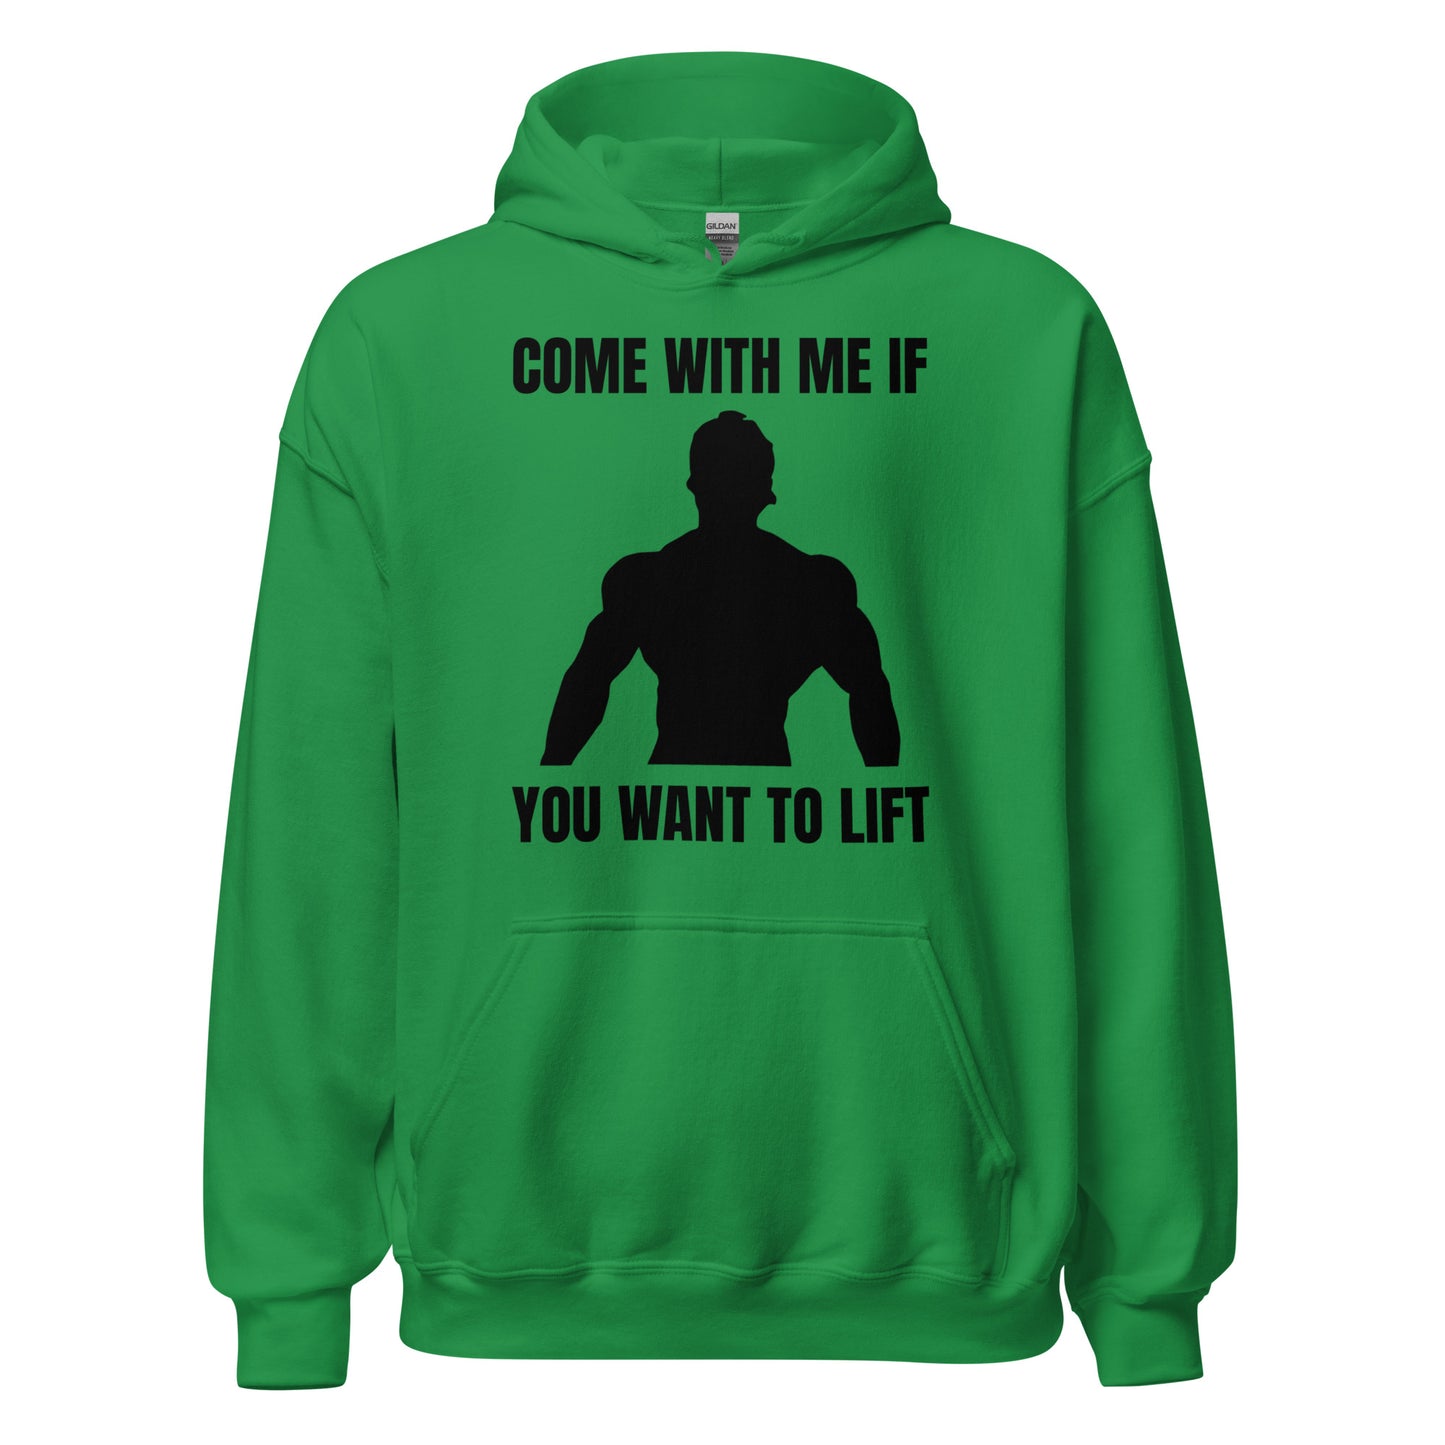 Come with Me if You Want to Lift Hoodie in Irish Green